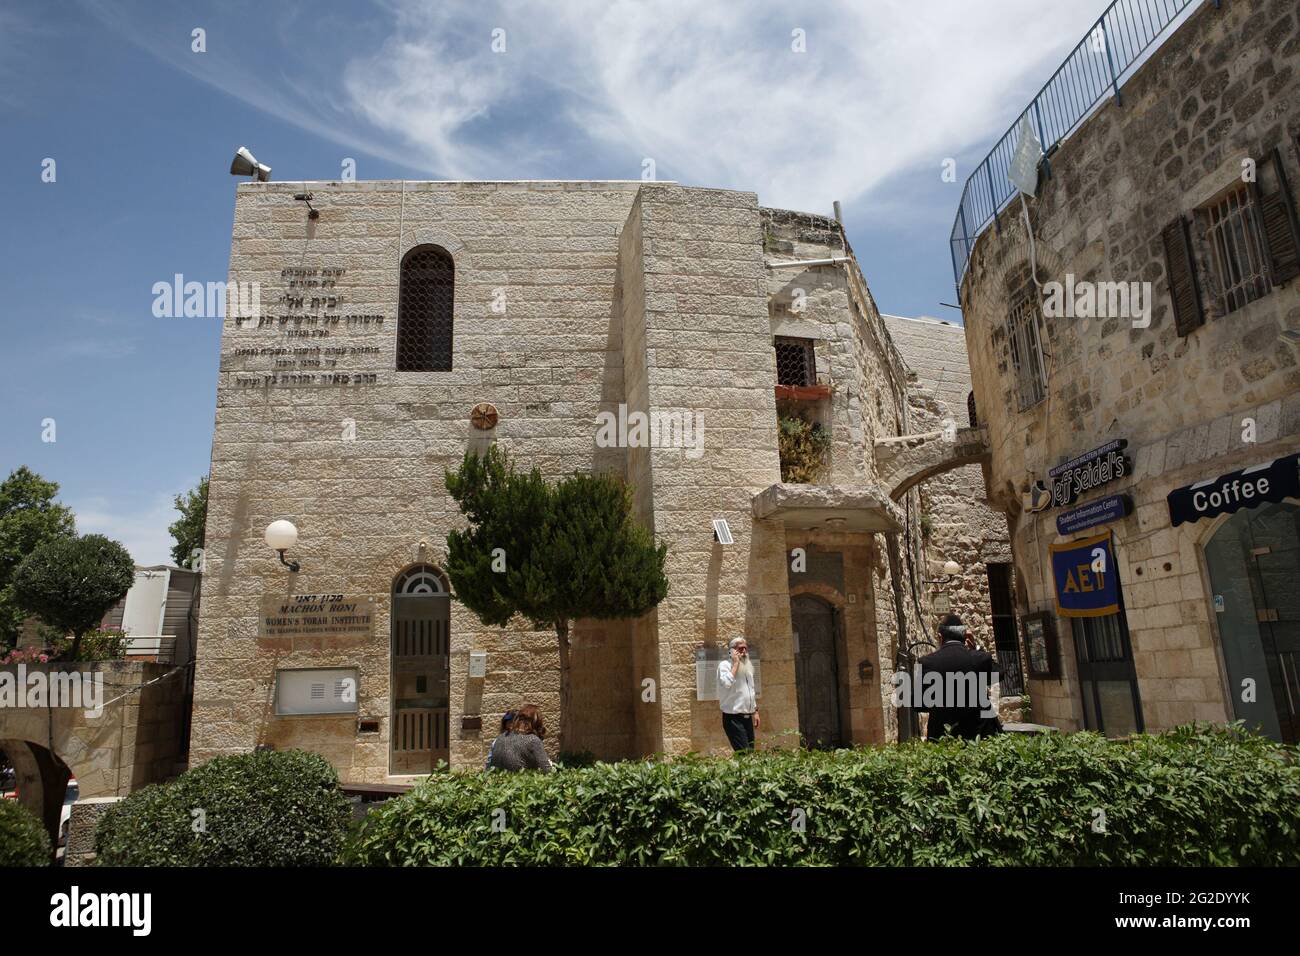 Beit El Synagogue, Kabbalah center in Jewish Quarter, built in 1733 ruined 1927, rebuilt in 1928, destroyed again in 1948, rebuilt by Israel in 1968. Stock Photo